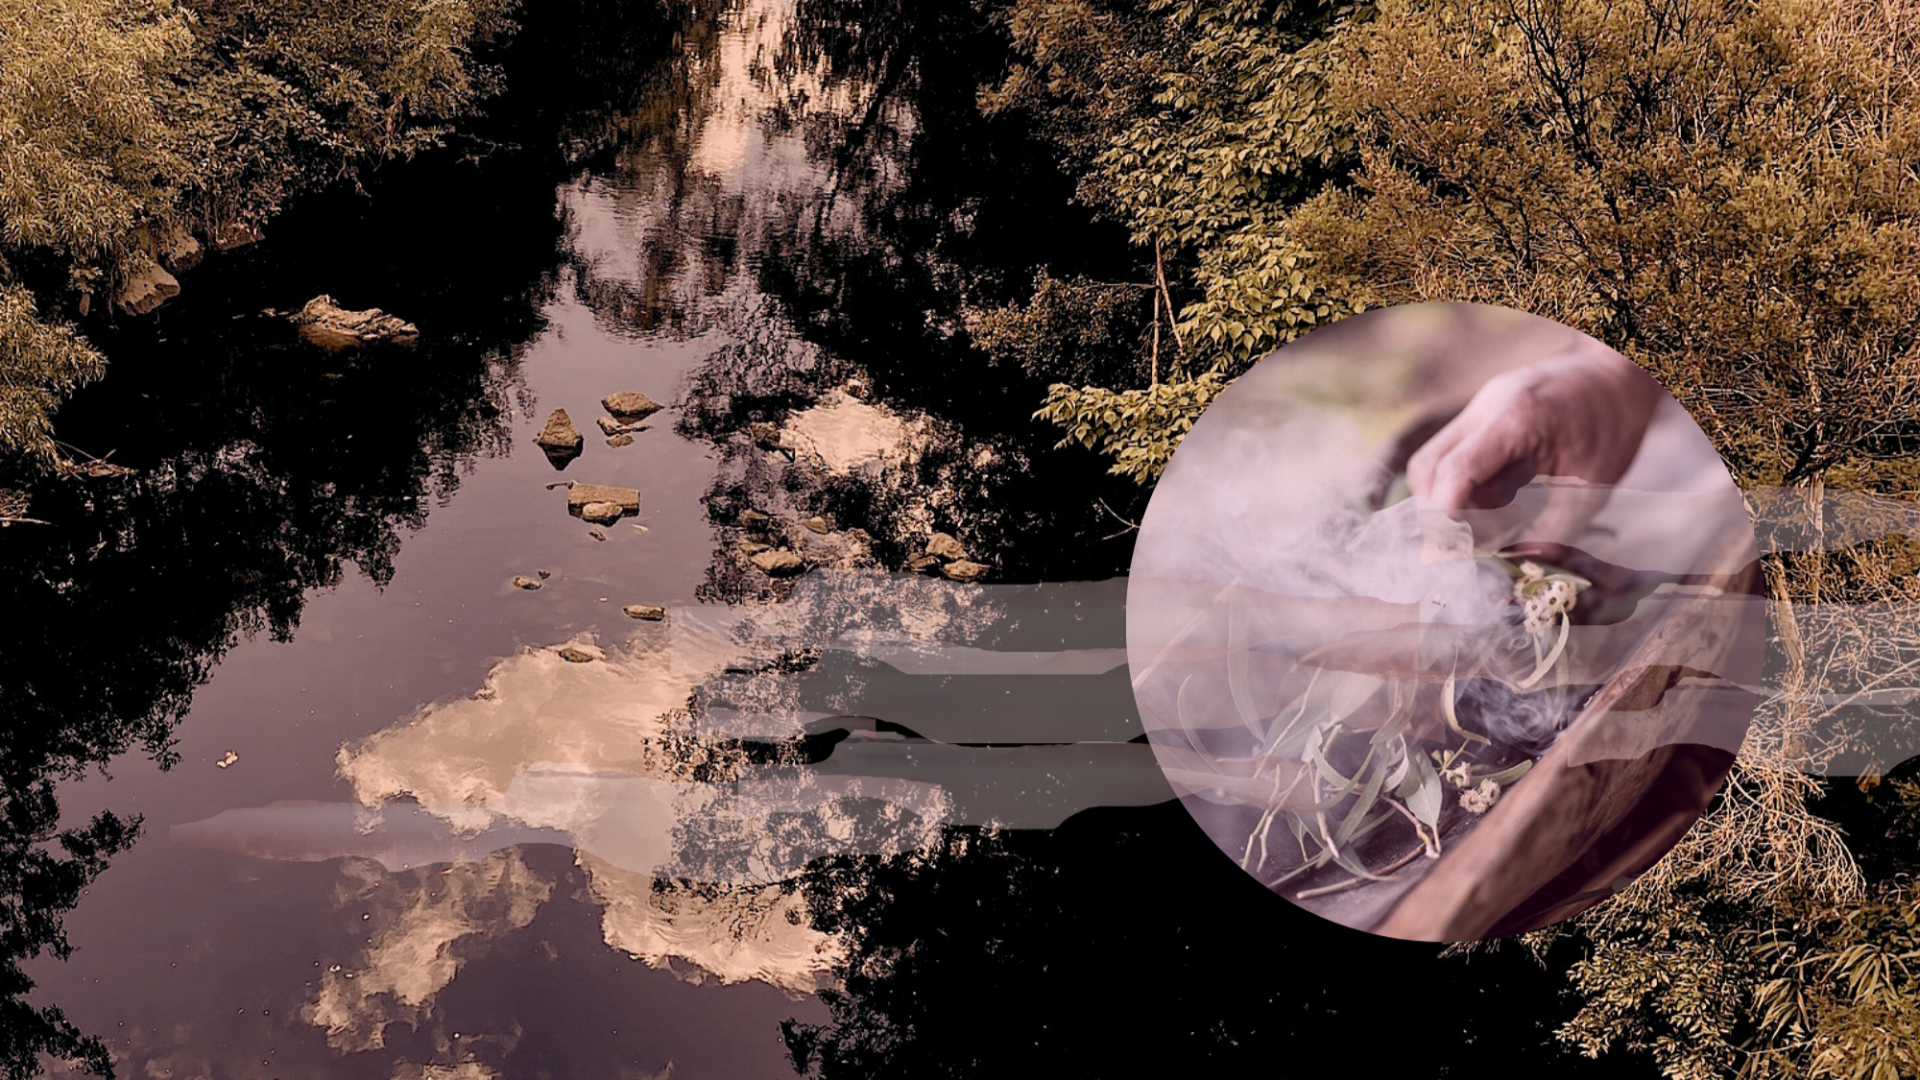 An image of a river in the background. The photo is taken from up above the waterway. on the left hand side there is a circular insert of an image of a smoking ceremony. Some smoke and mist effects blend between the circular insert and the river background.